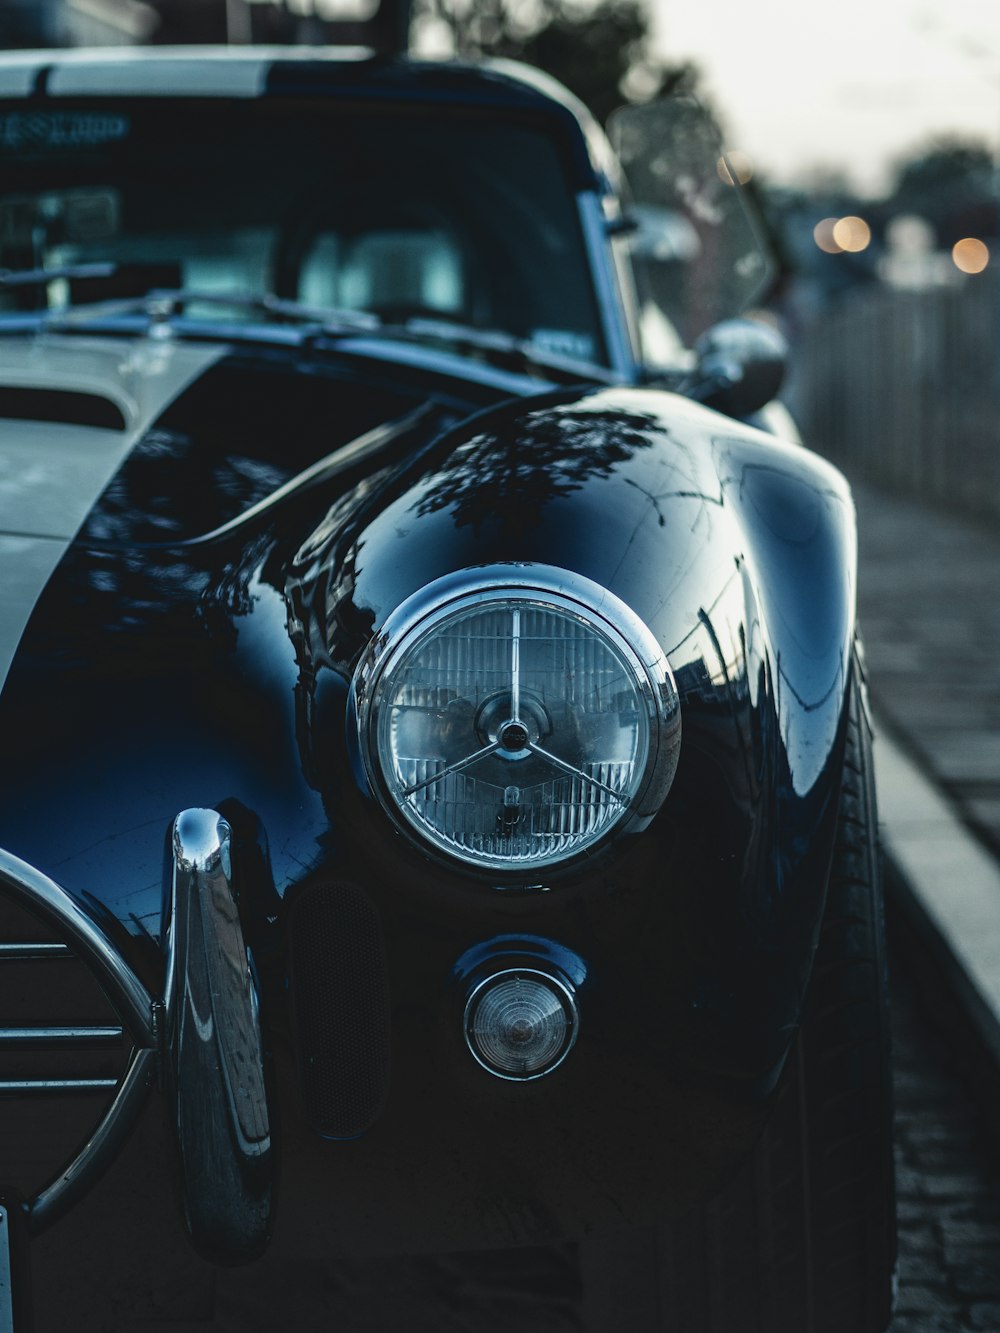 500+ Shelby Cobra Pictures | Download Free Images on Unsplash